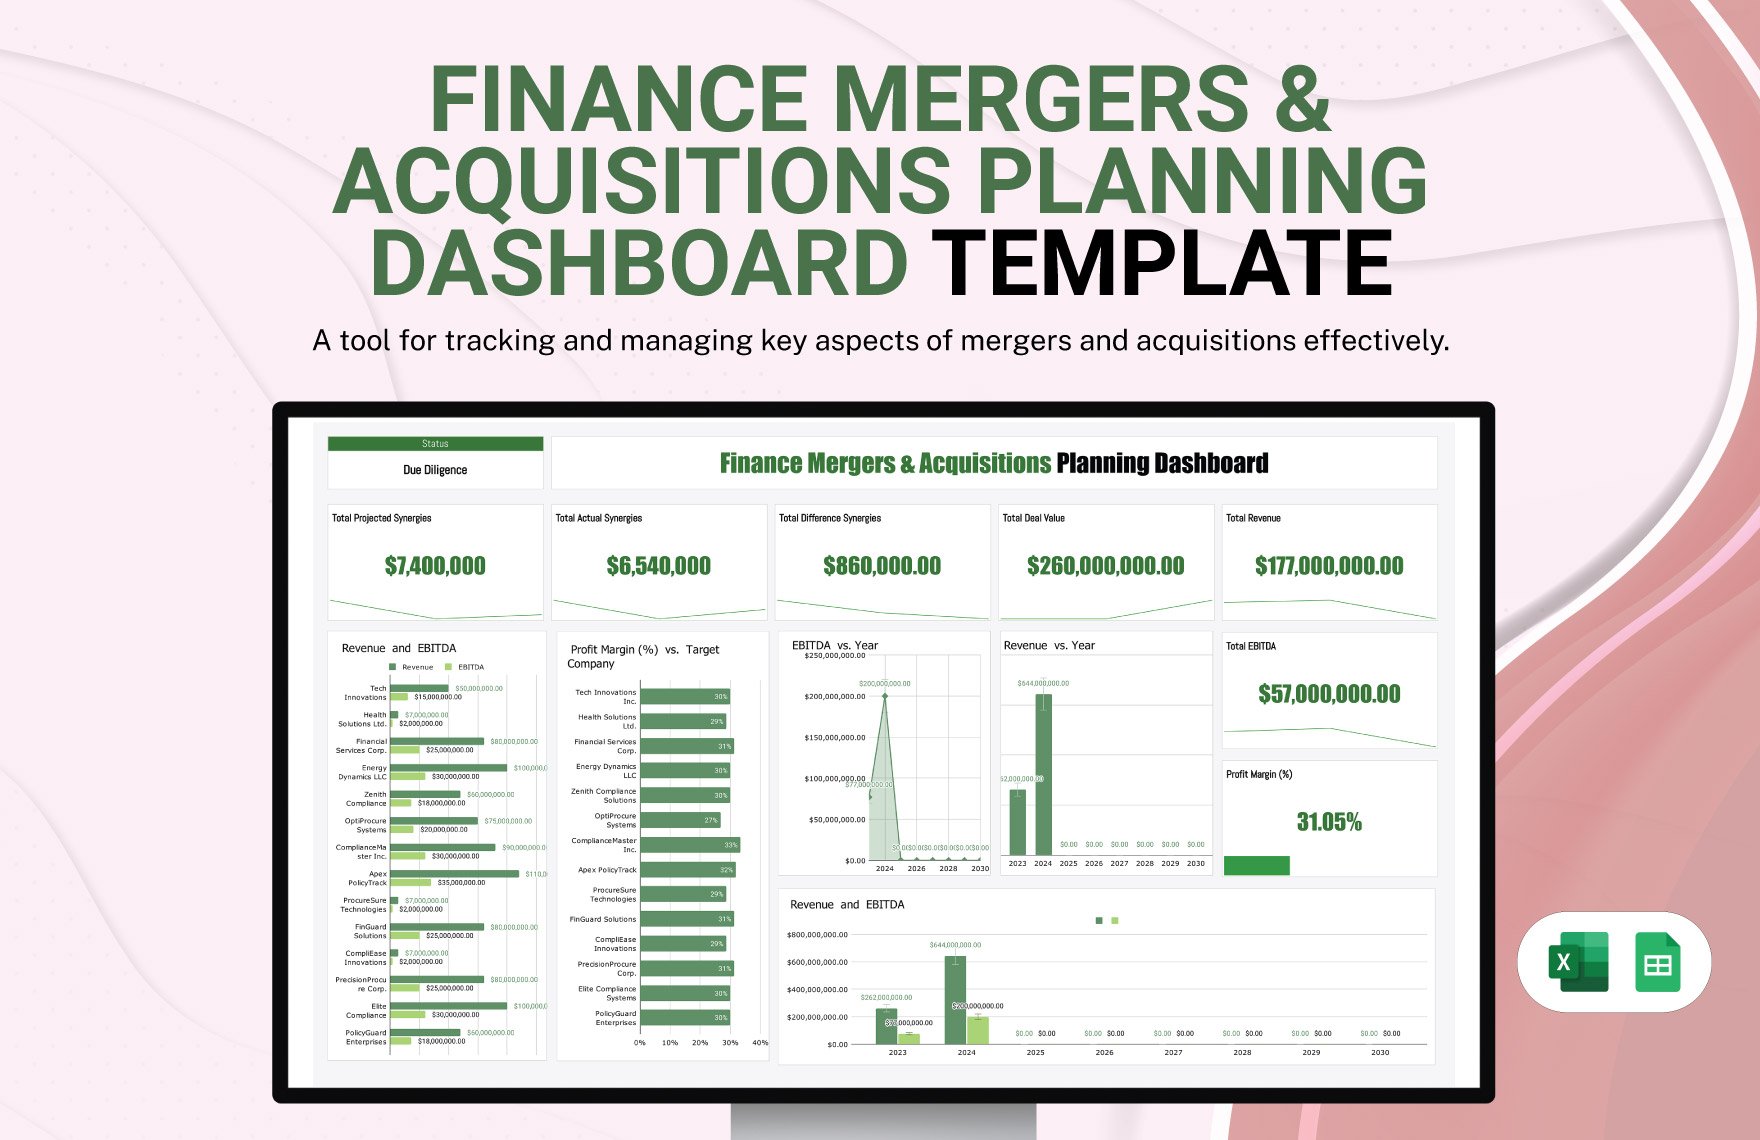 Finance Mergers & Acquisitions Planning Dashboard Template in Excel, Google Sheets